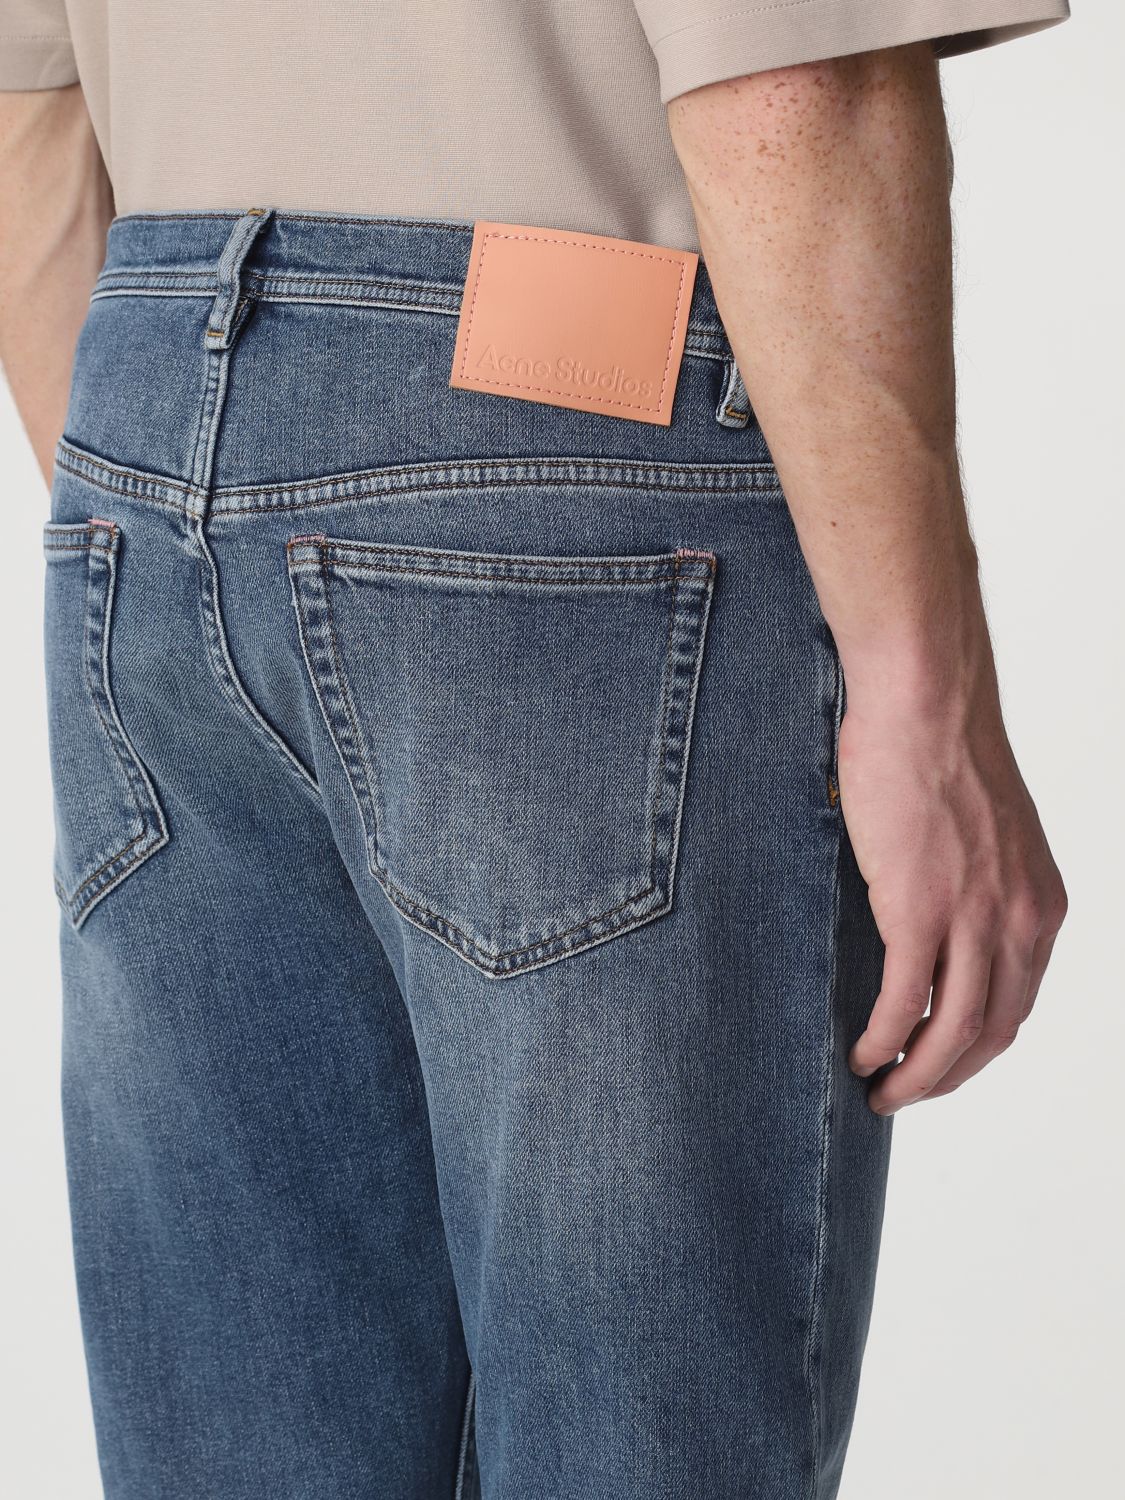 Jeans Acne Studios: Jeans cropped Acne Studios in denim washed blue 5